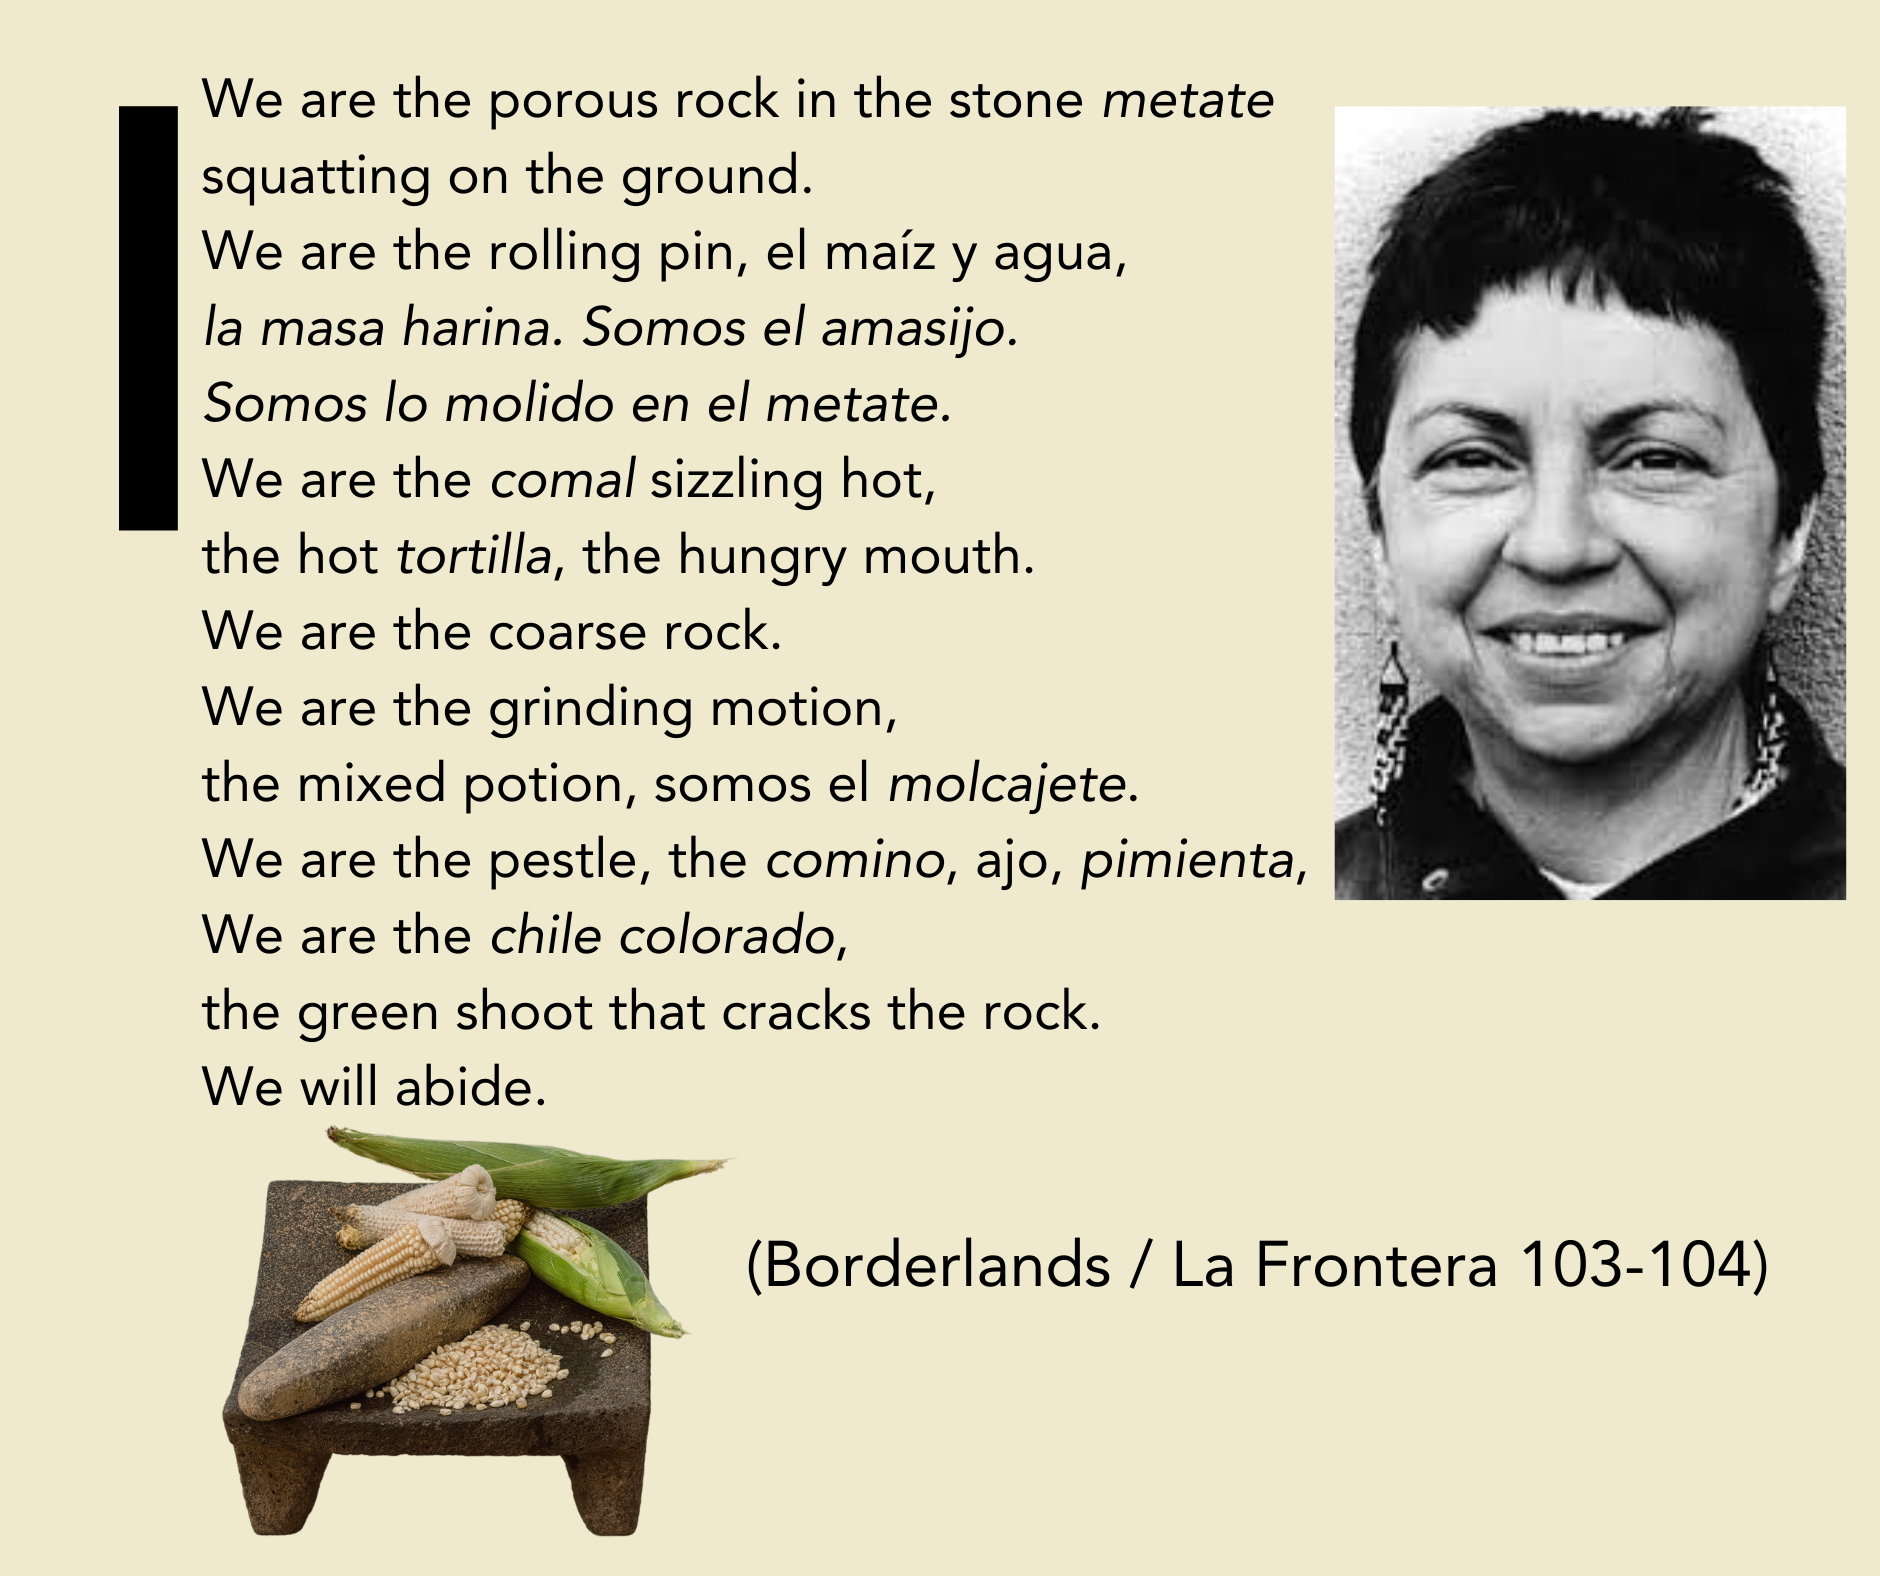 Image shows the headshot of a woman with dark short hair wearing long earrings. There are words to a poem. There is also a molcajete with corn on it.